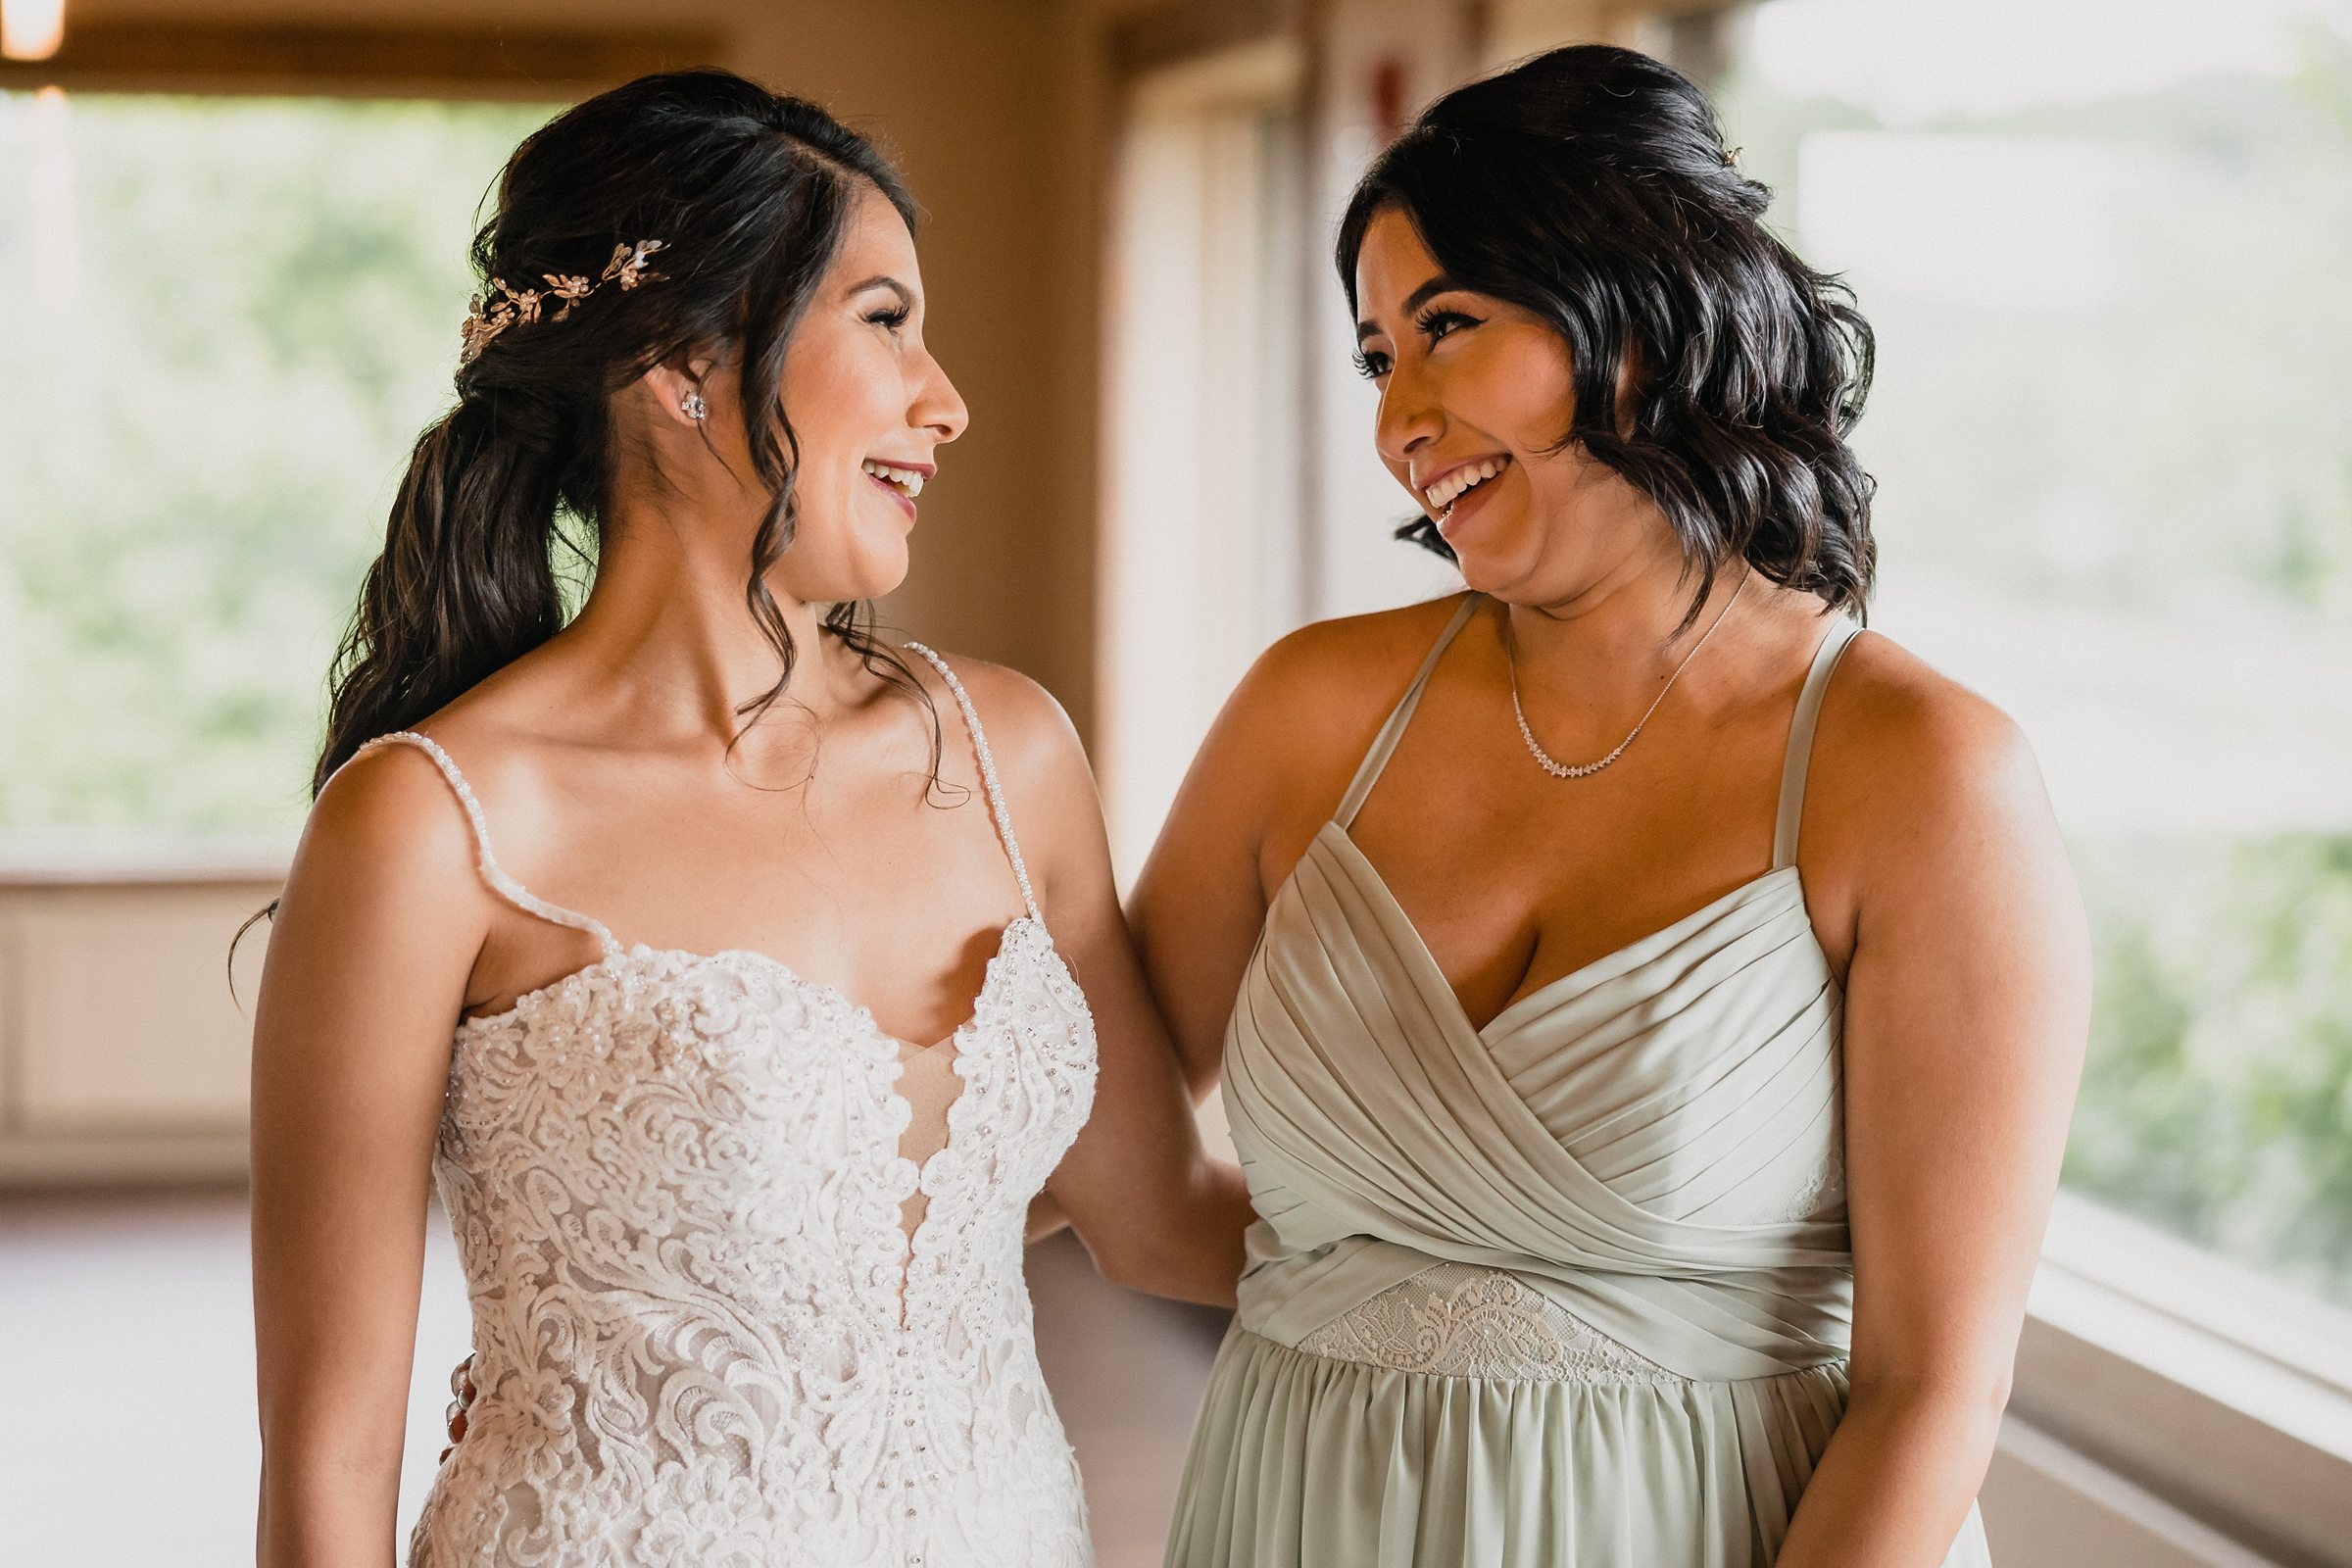 Bride and her sister laugh together during her wedding at the Fisherman's Inn in Elburn, Illinois.